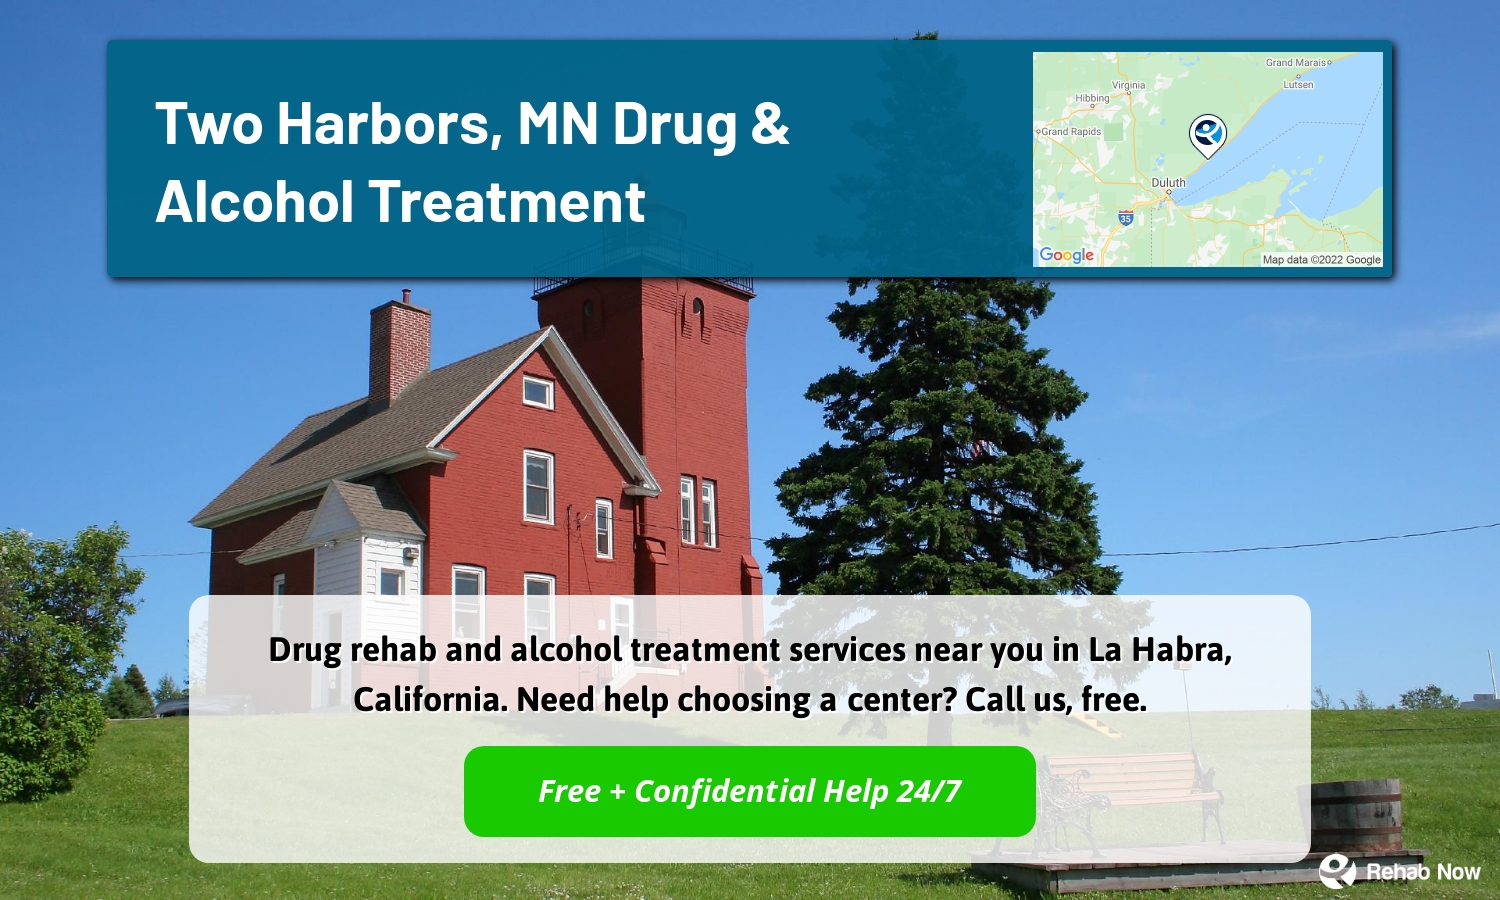 Drug rehab and alcohol treatment services near you in La Habra, California. Need help choosing a center? Call us, free.